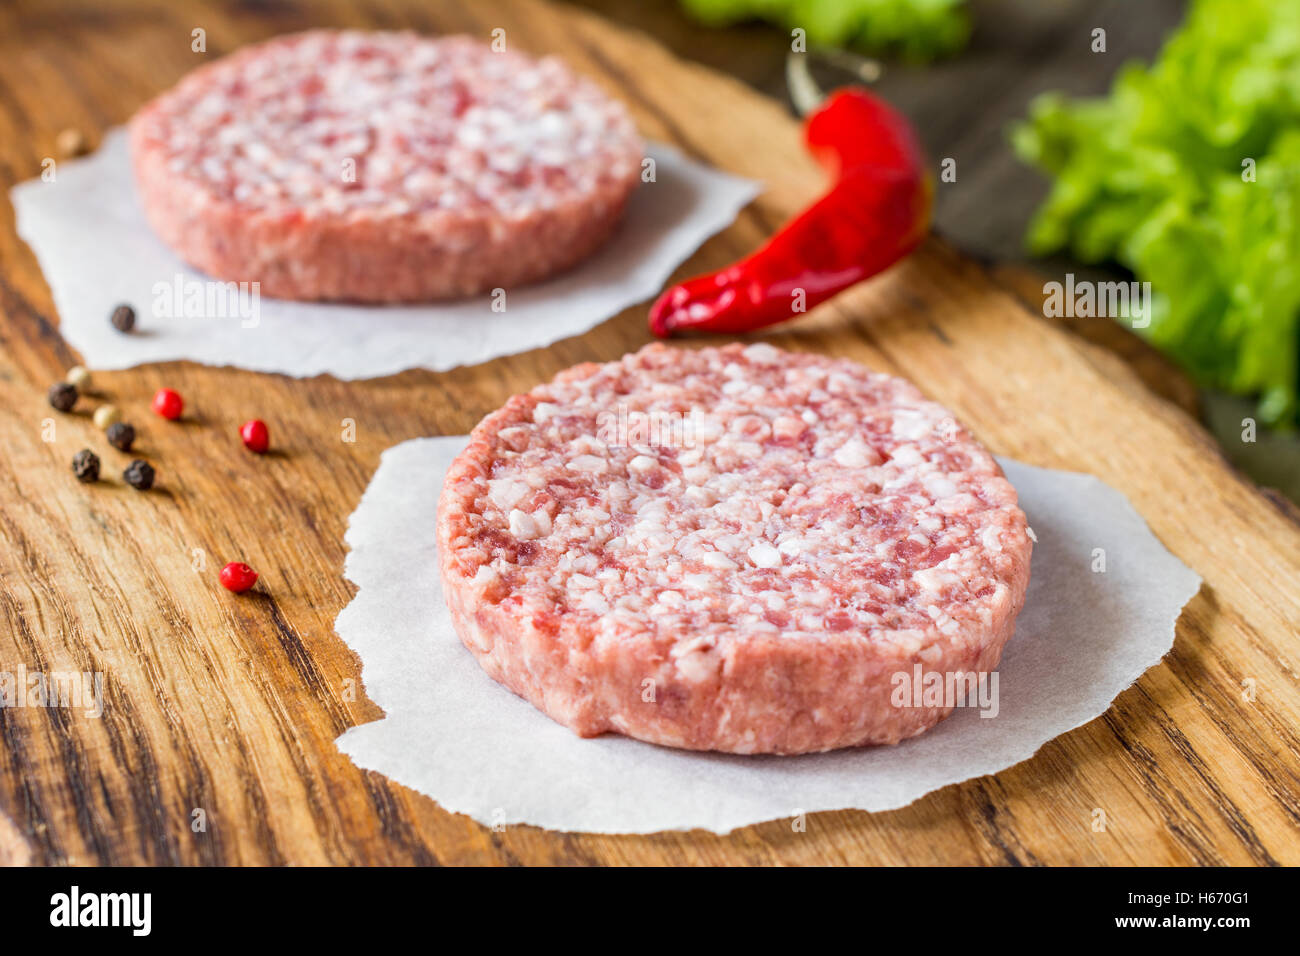 Raw fresh burger meat patties on wooden chopping board. Close up Stock Photo